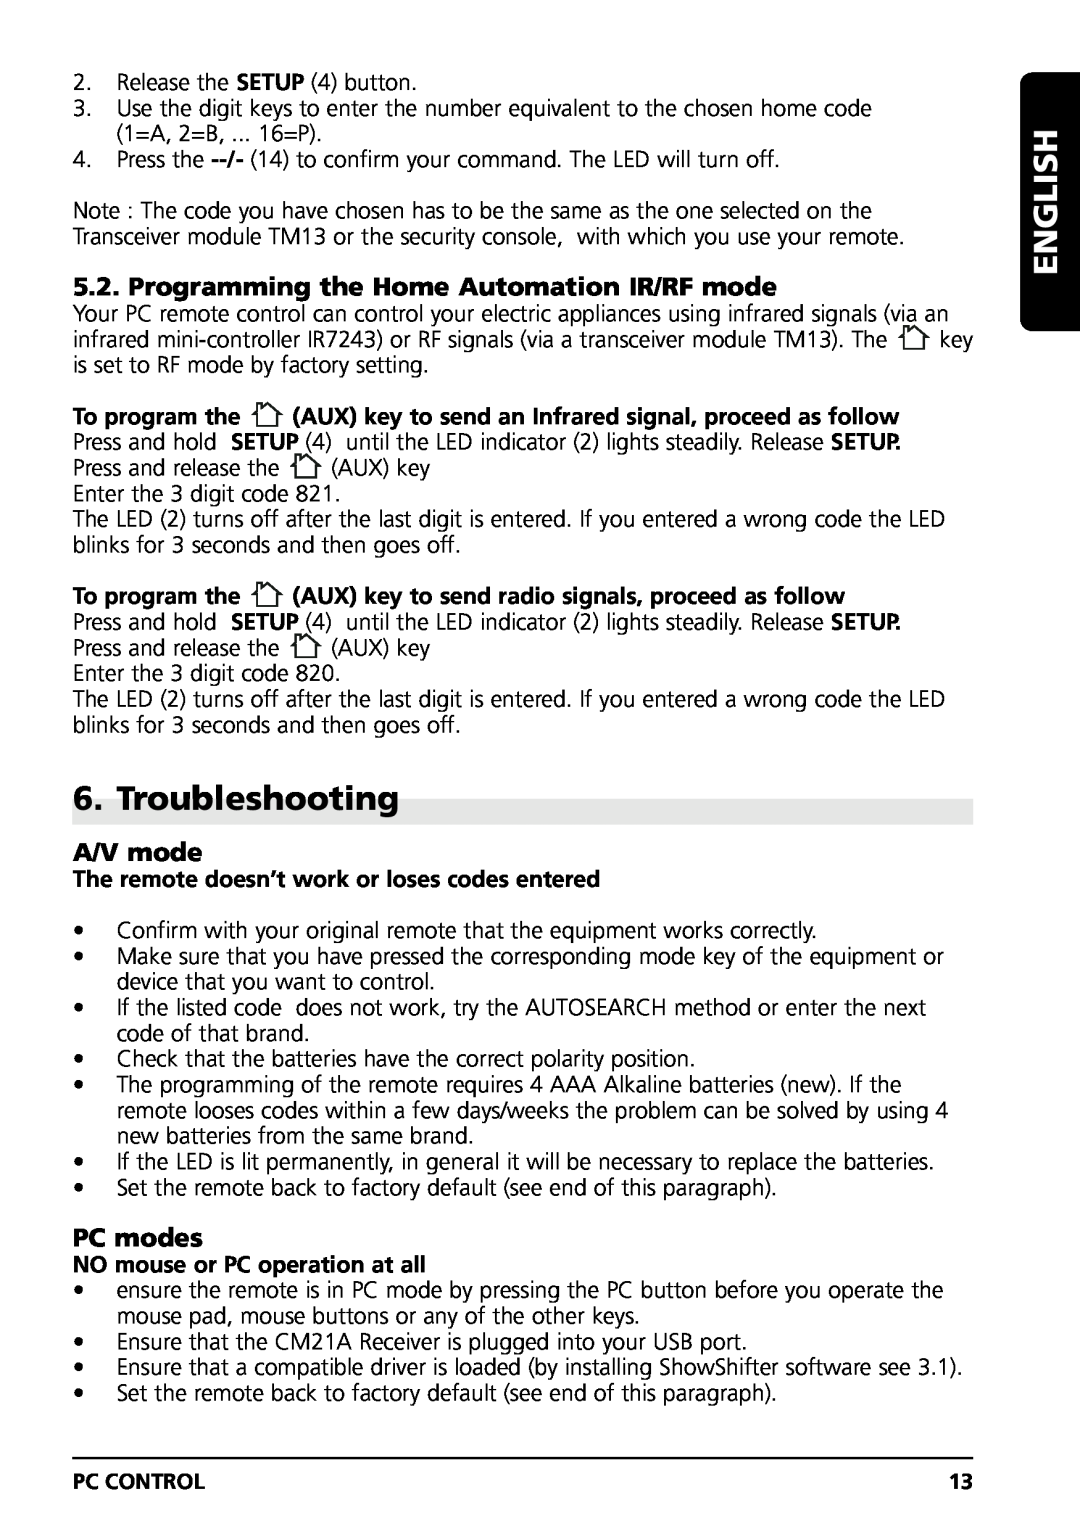 Marmitek PC CONTROL owner manual Troubleshooting, Programming the Home Automation IR/RF mode, A/V mode, PC modes, English 